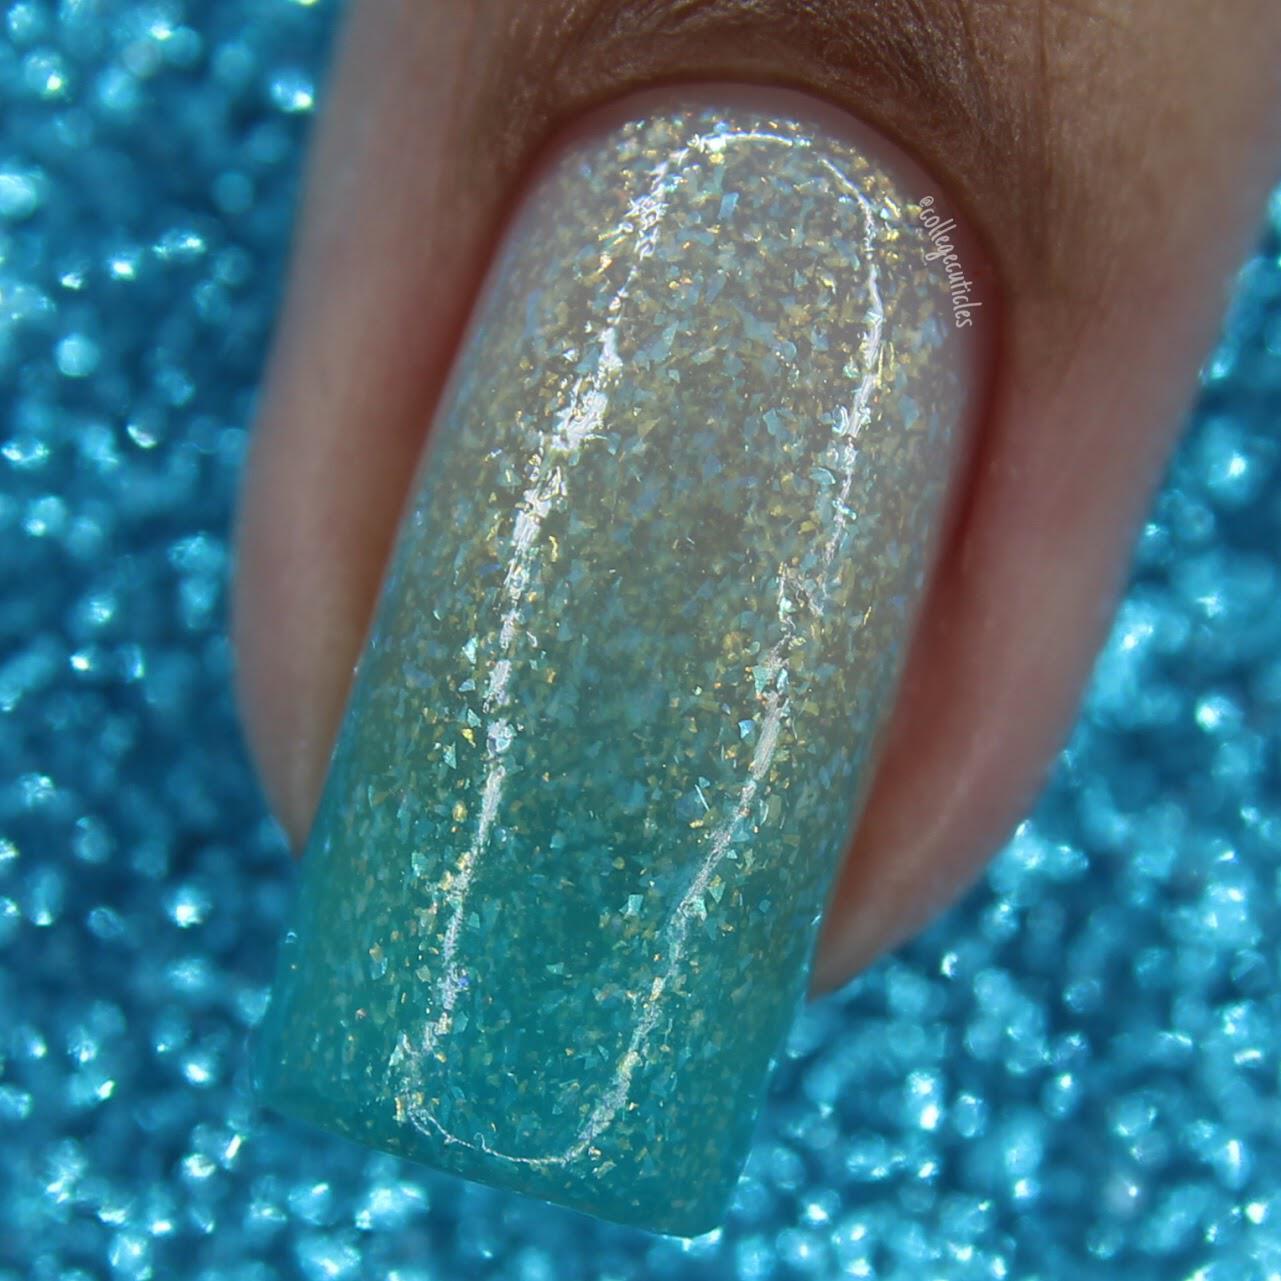 Platinum Nails & Beauty | Home-based Venue in Southampton - Treatwell